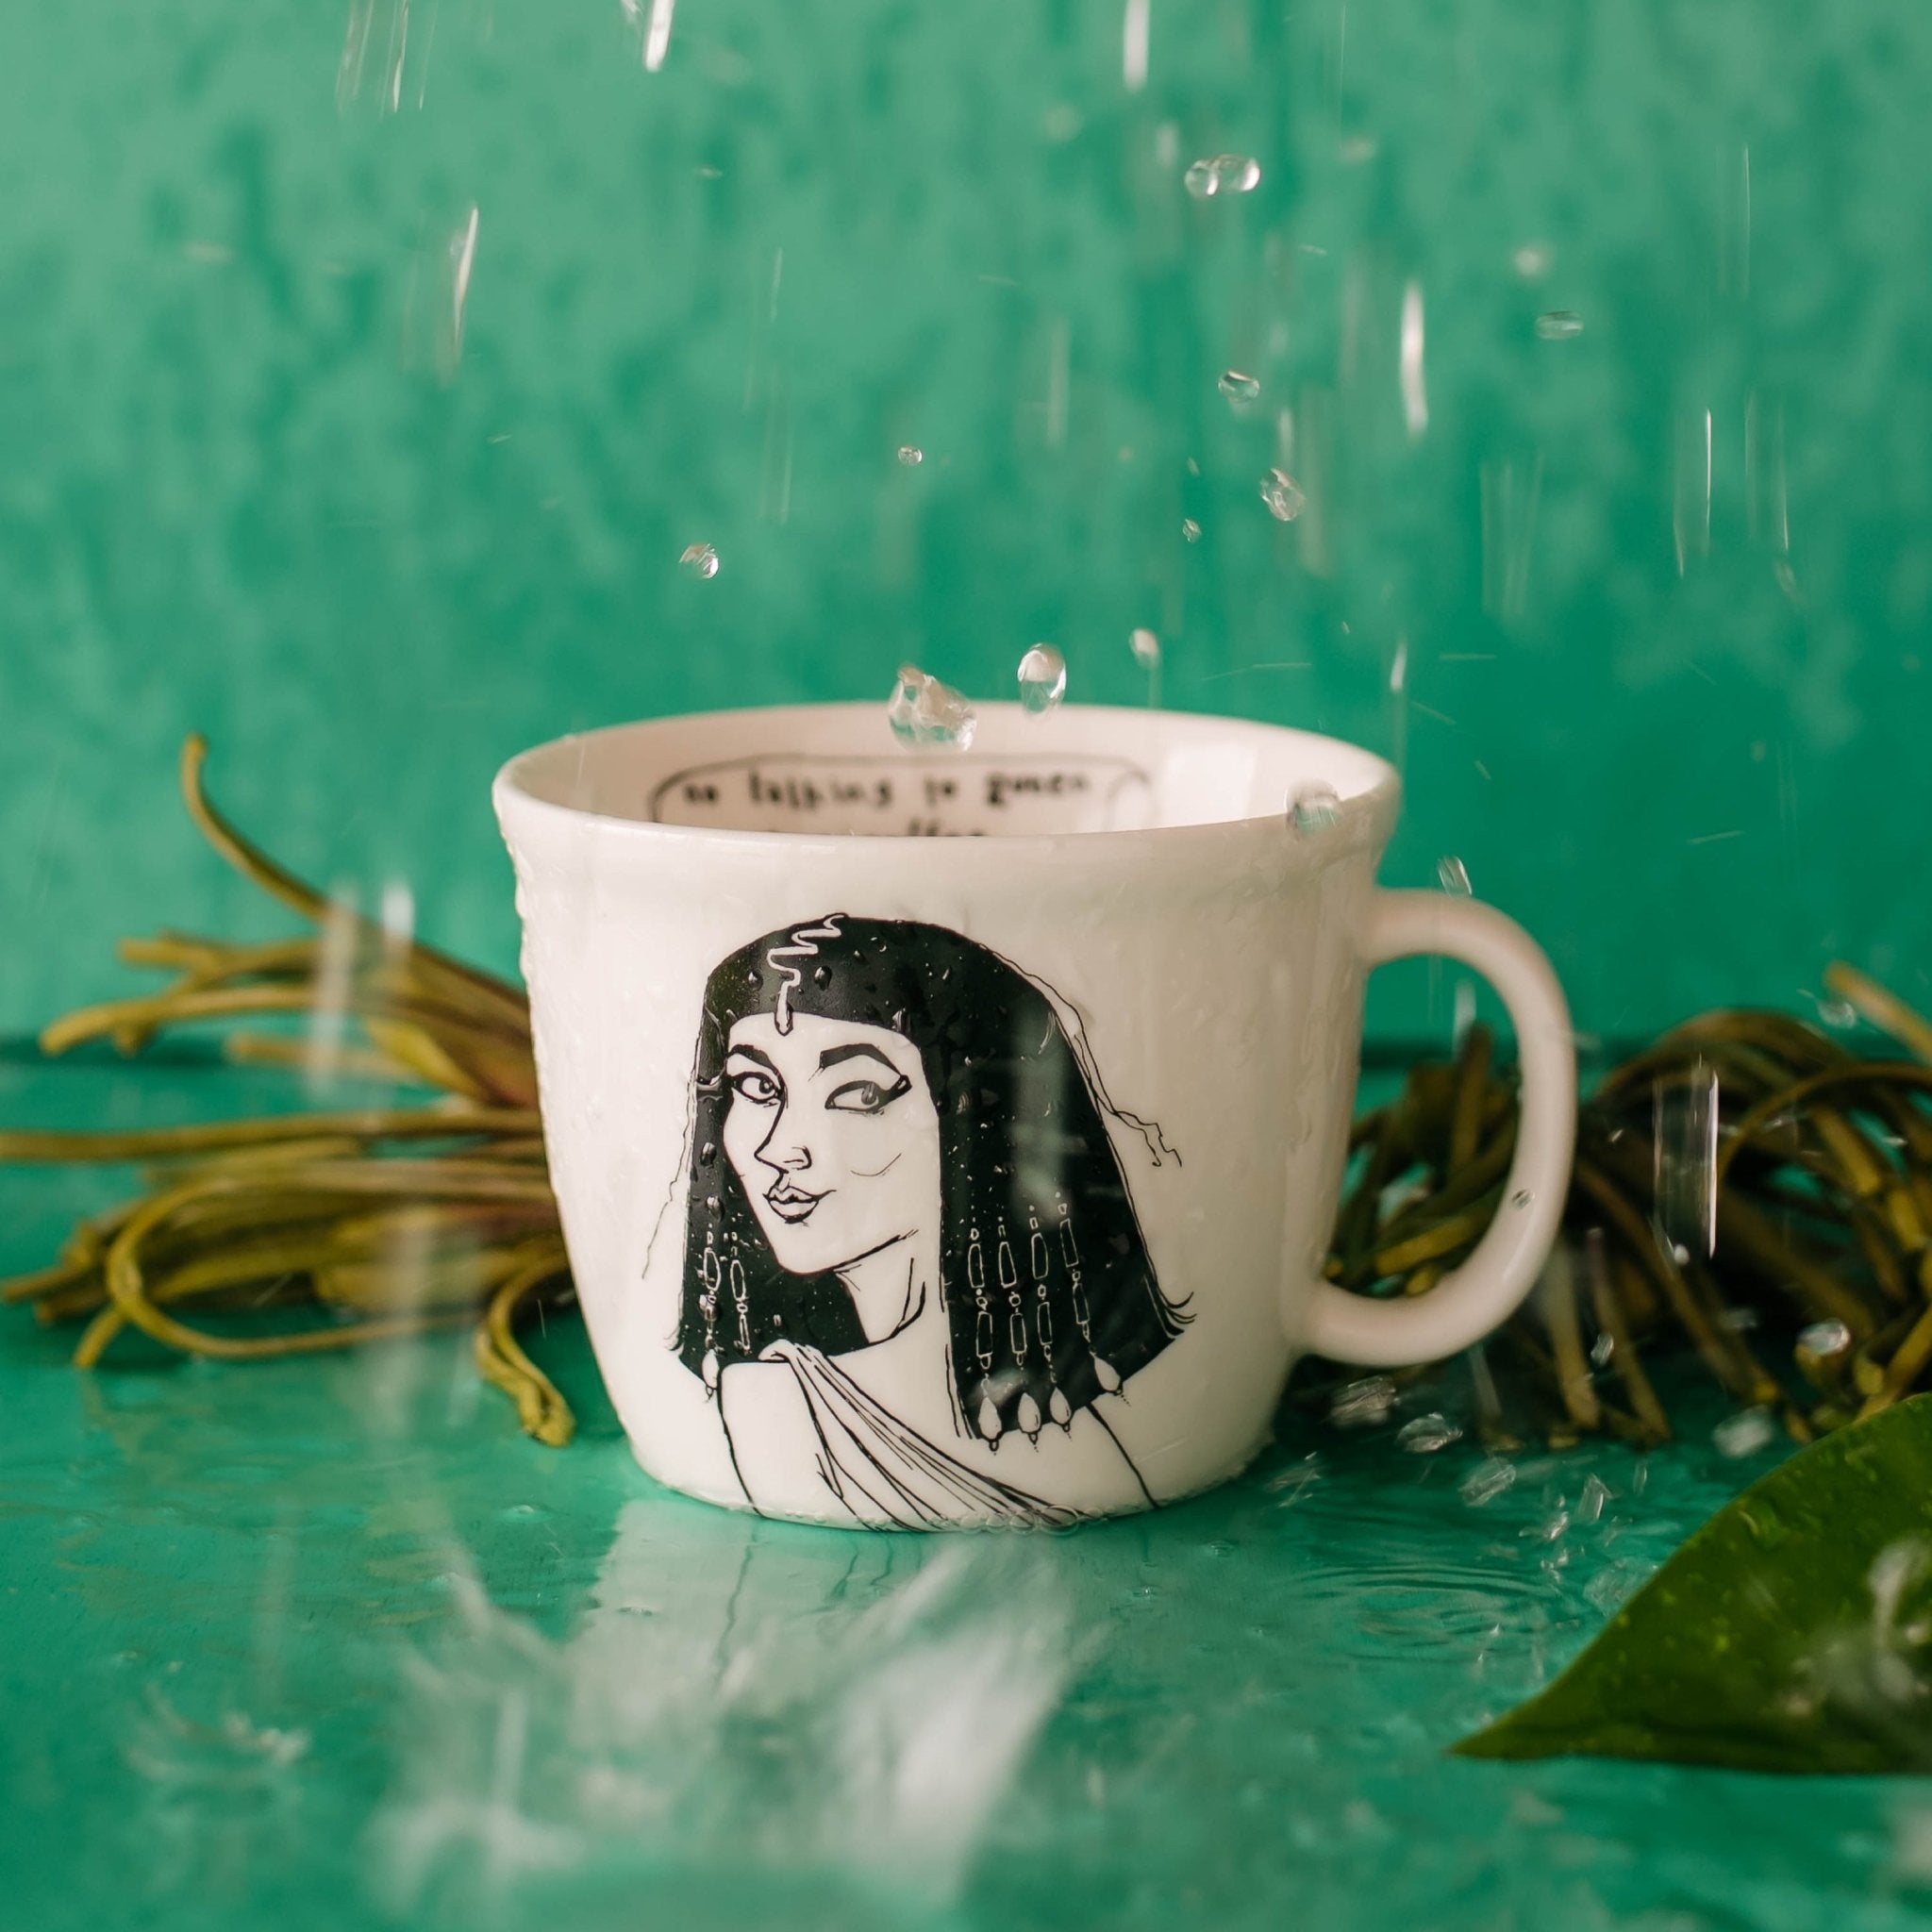 Porcelain cup inspired by Cleopatra with water